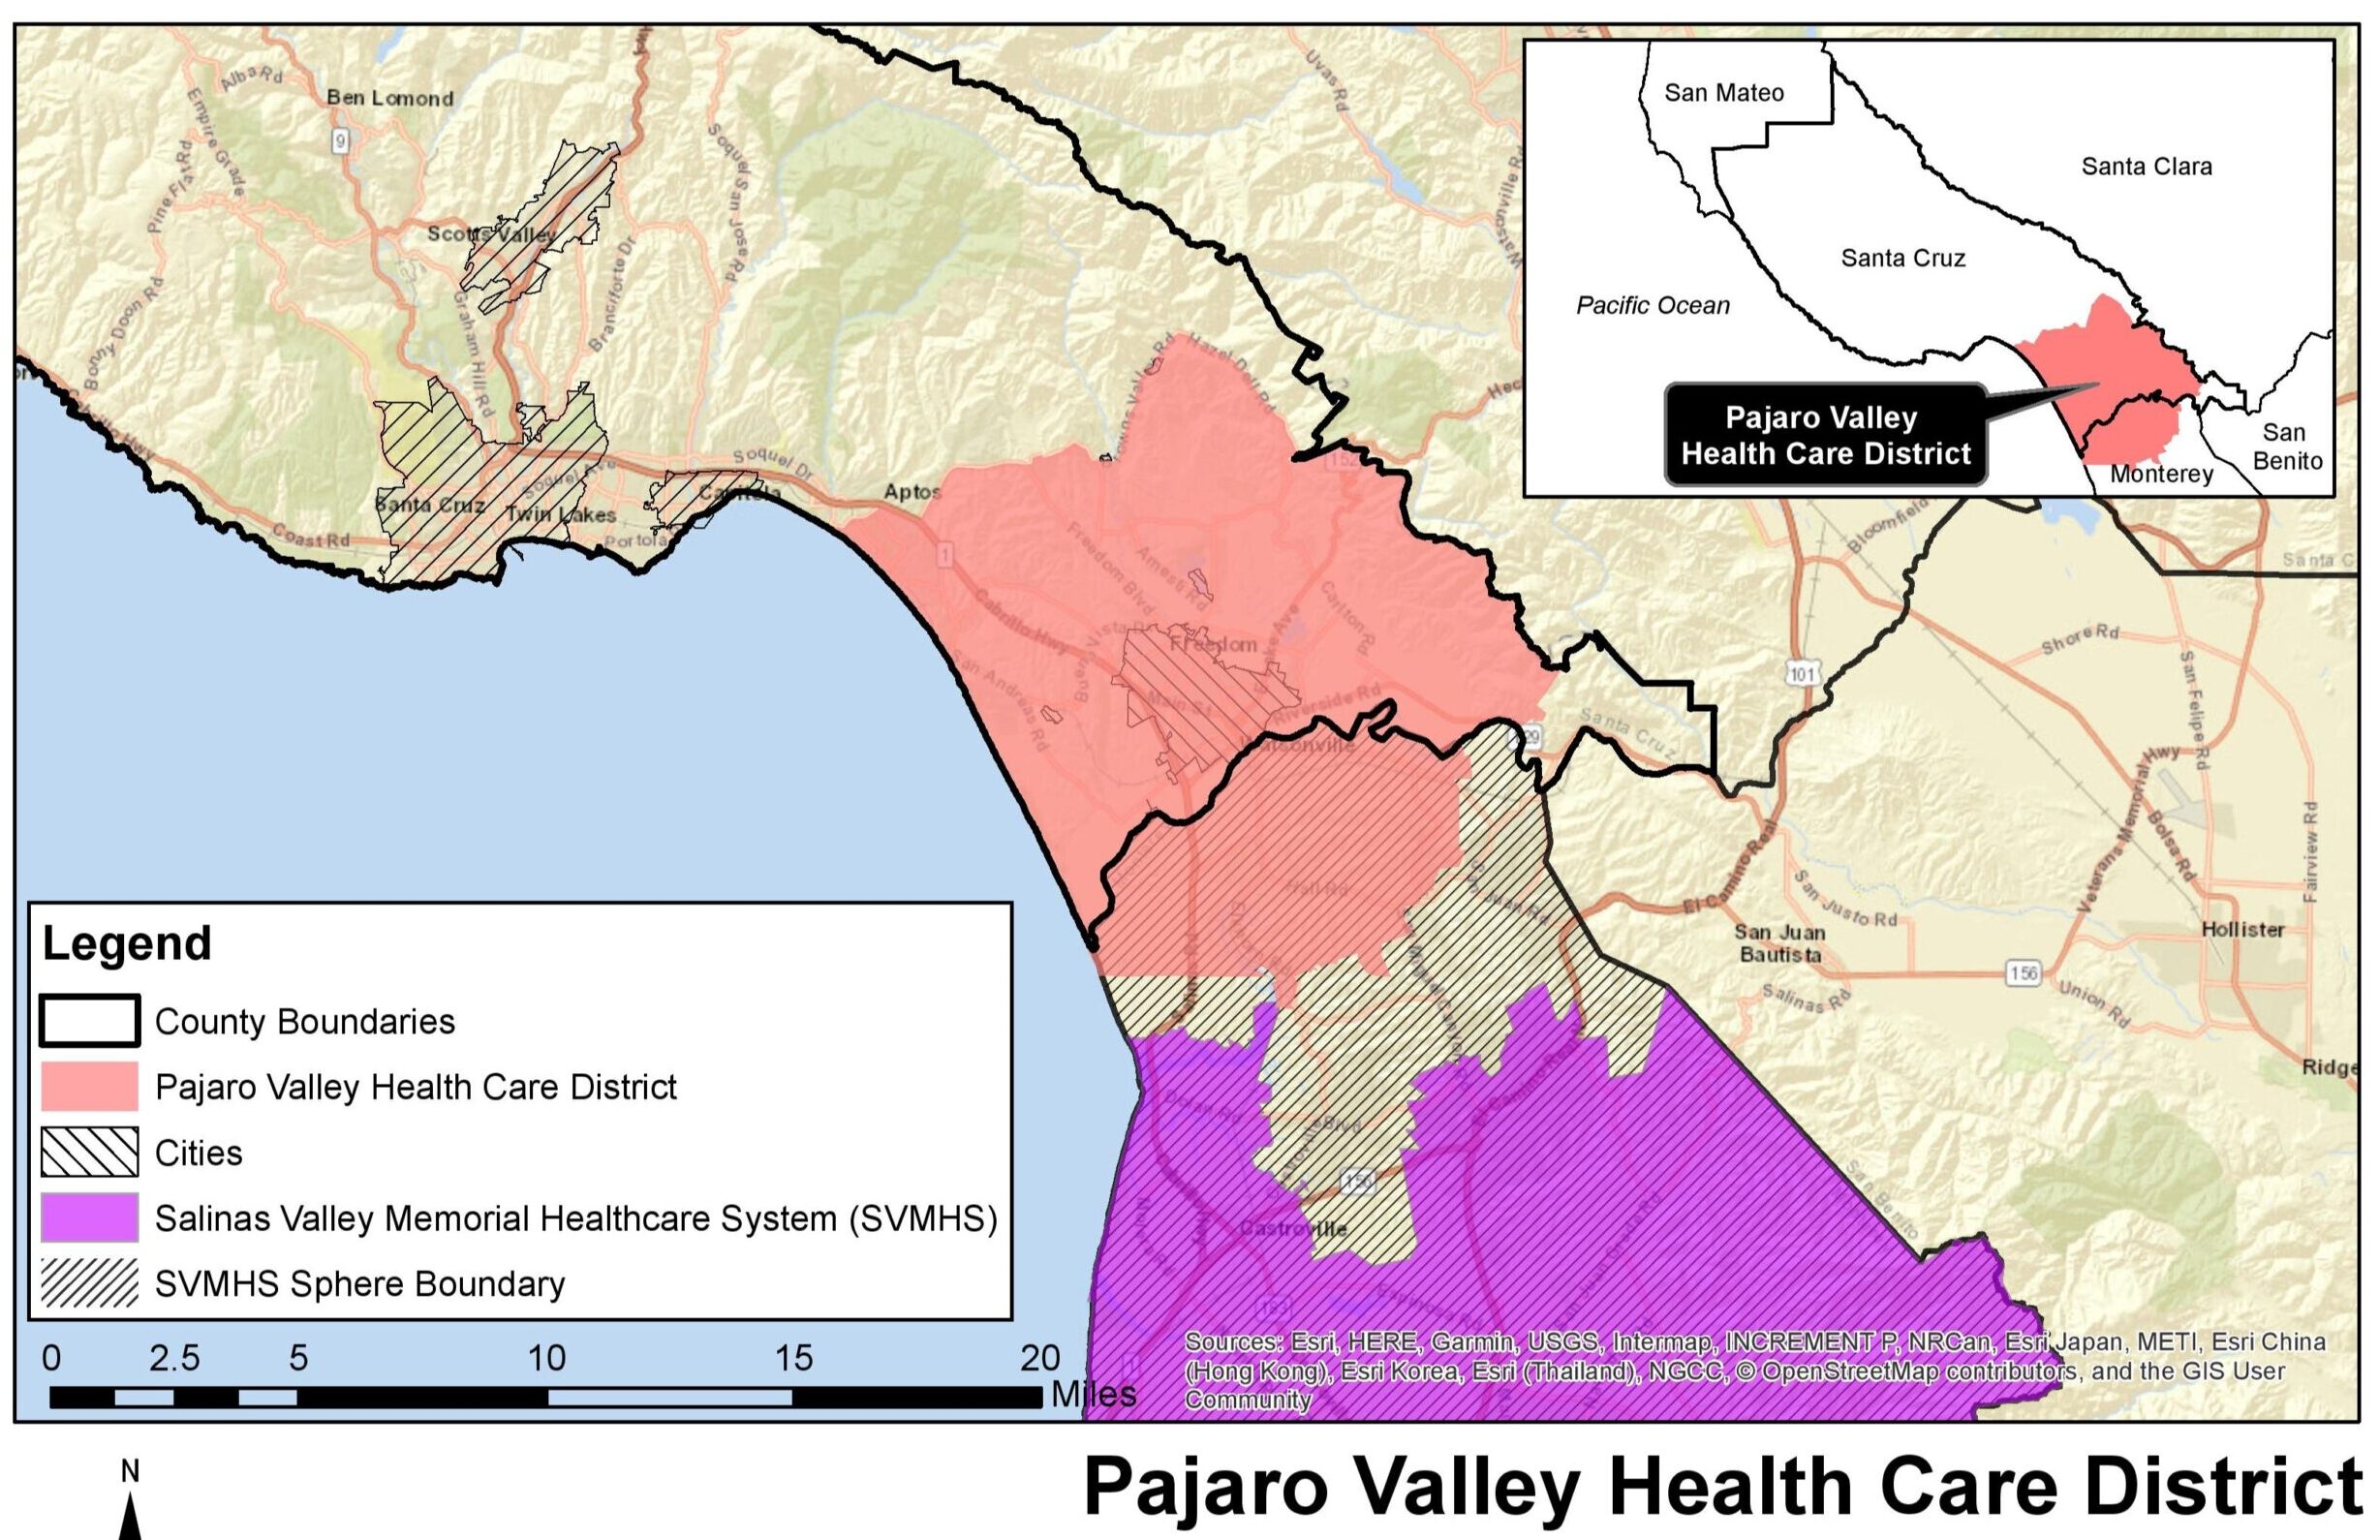 A map of the Pajaro Valley Health Care District.